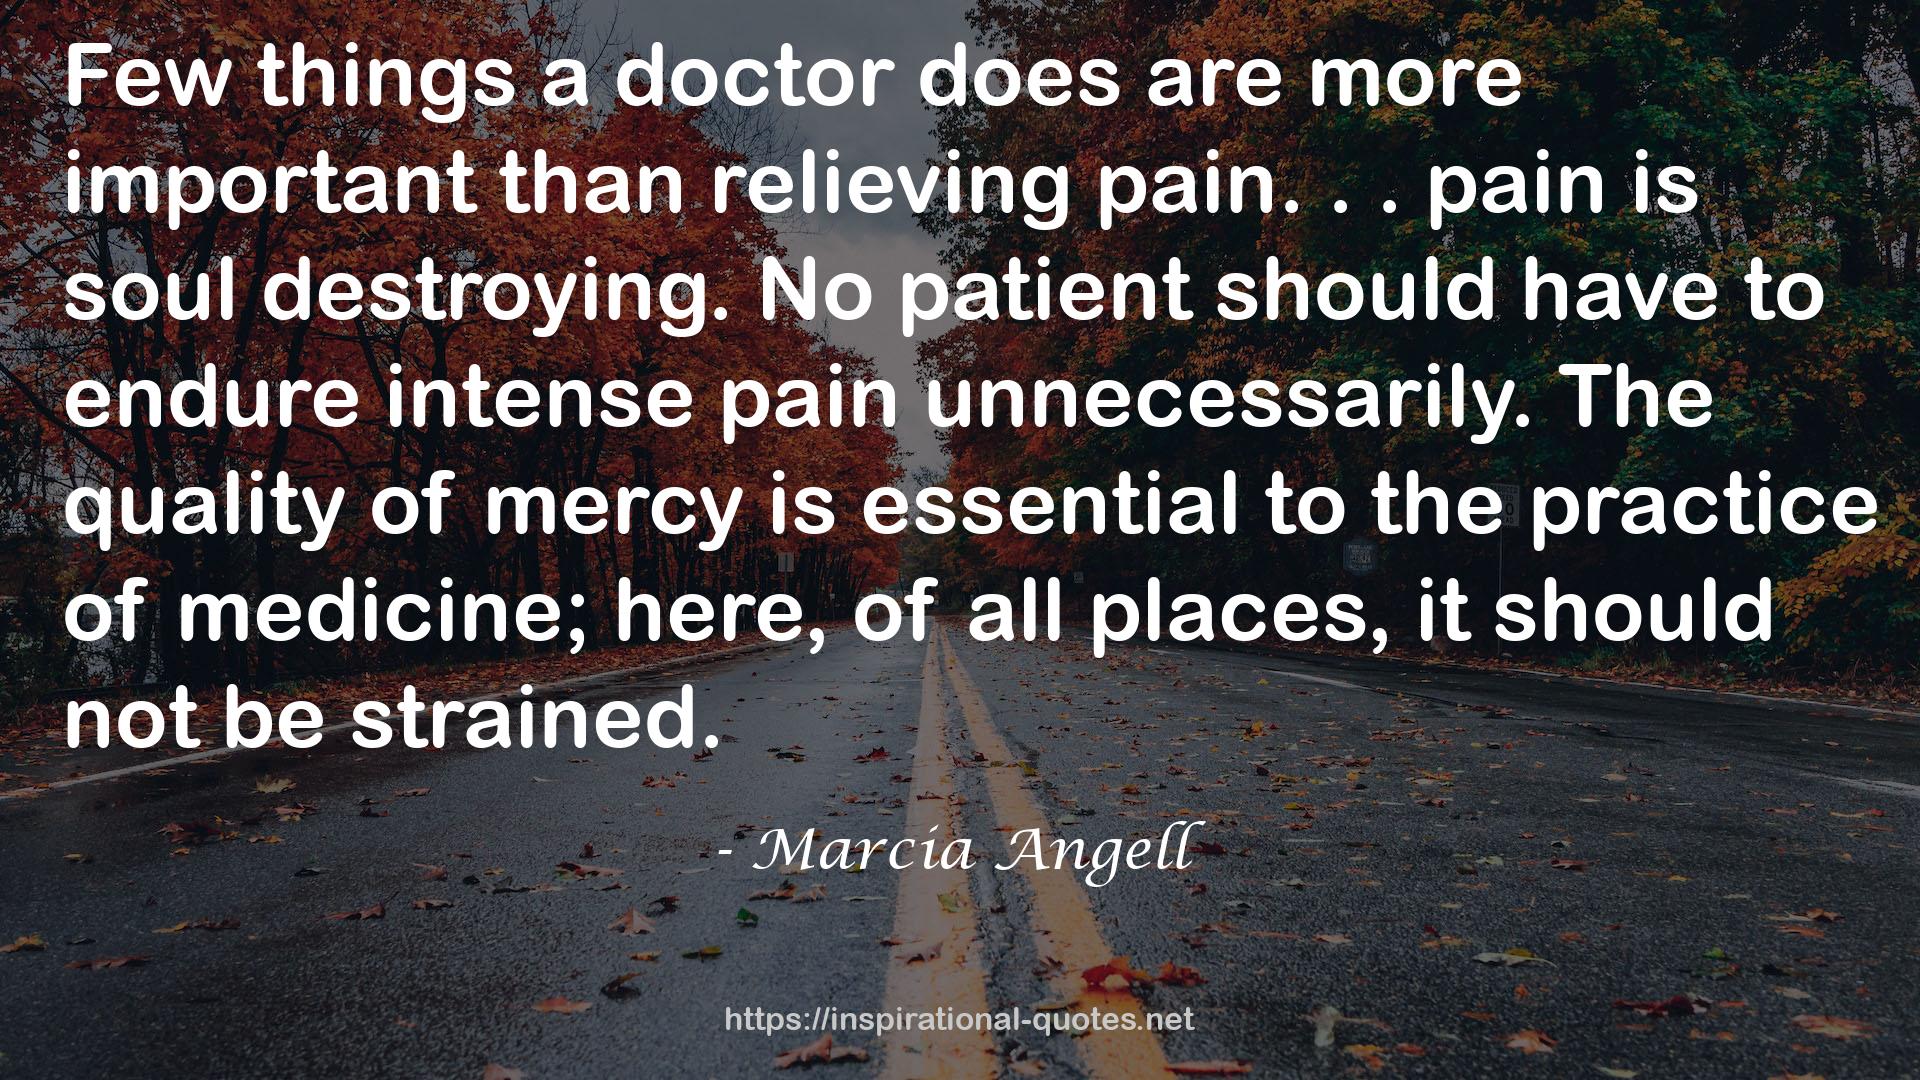 Marcia Angell QUOTES